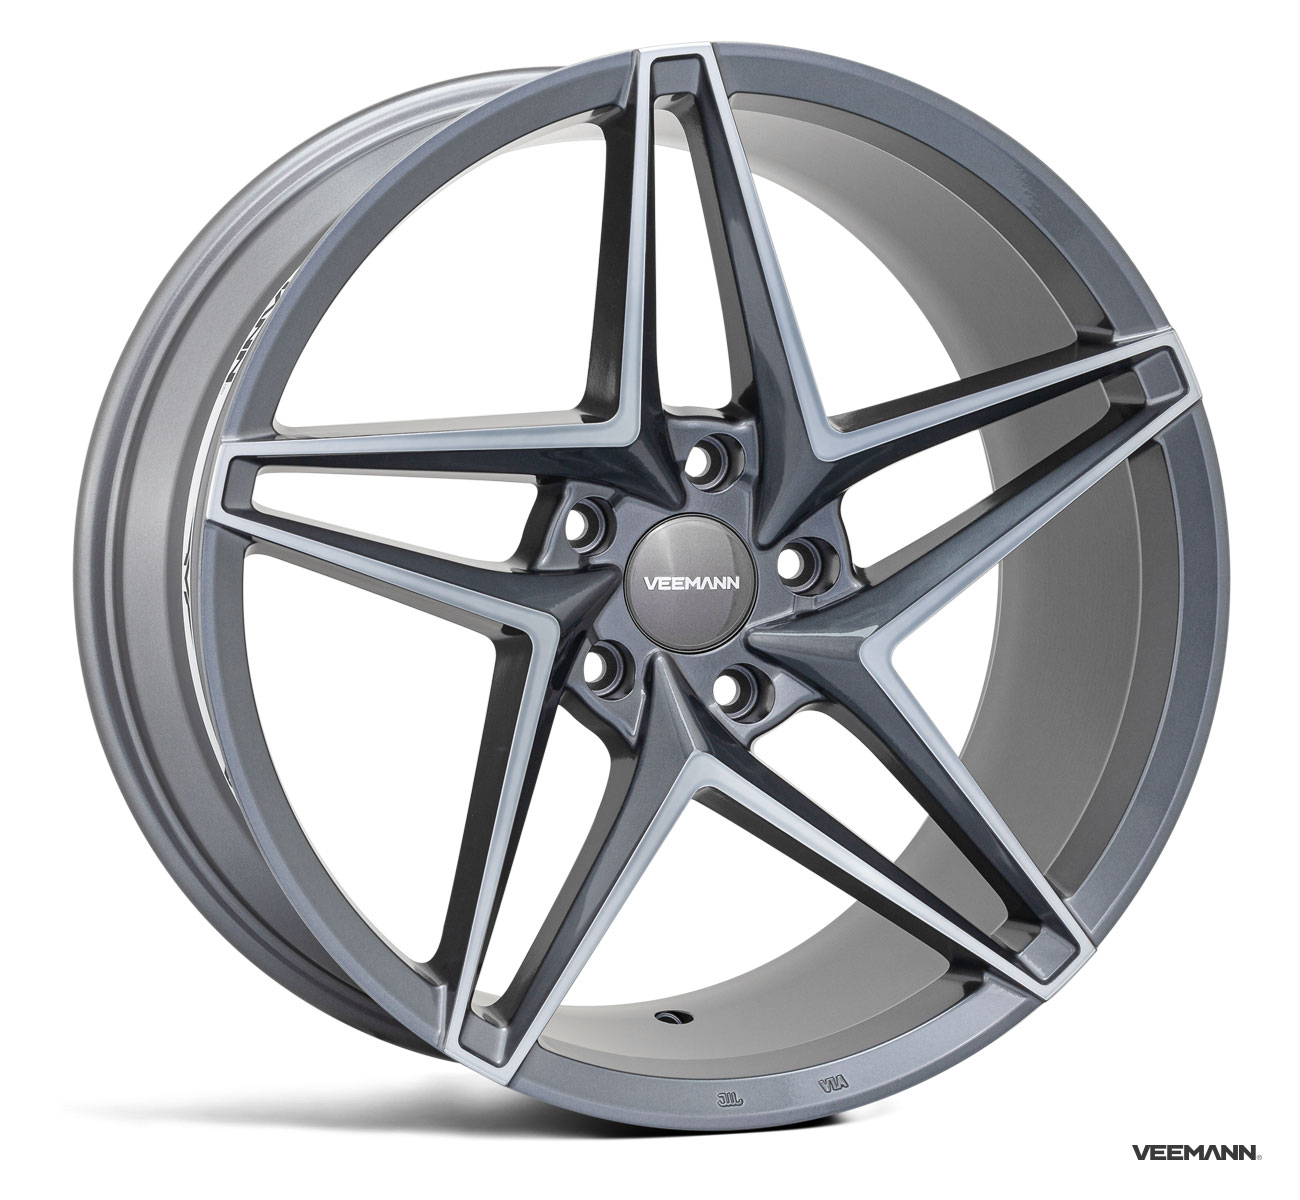 NEW 19" VEEMANN V-FS46 ALLOY WHEELS IN GRAPHITE SMOKE POL WITH WIDER 9.5" REARS